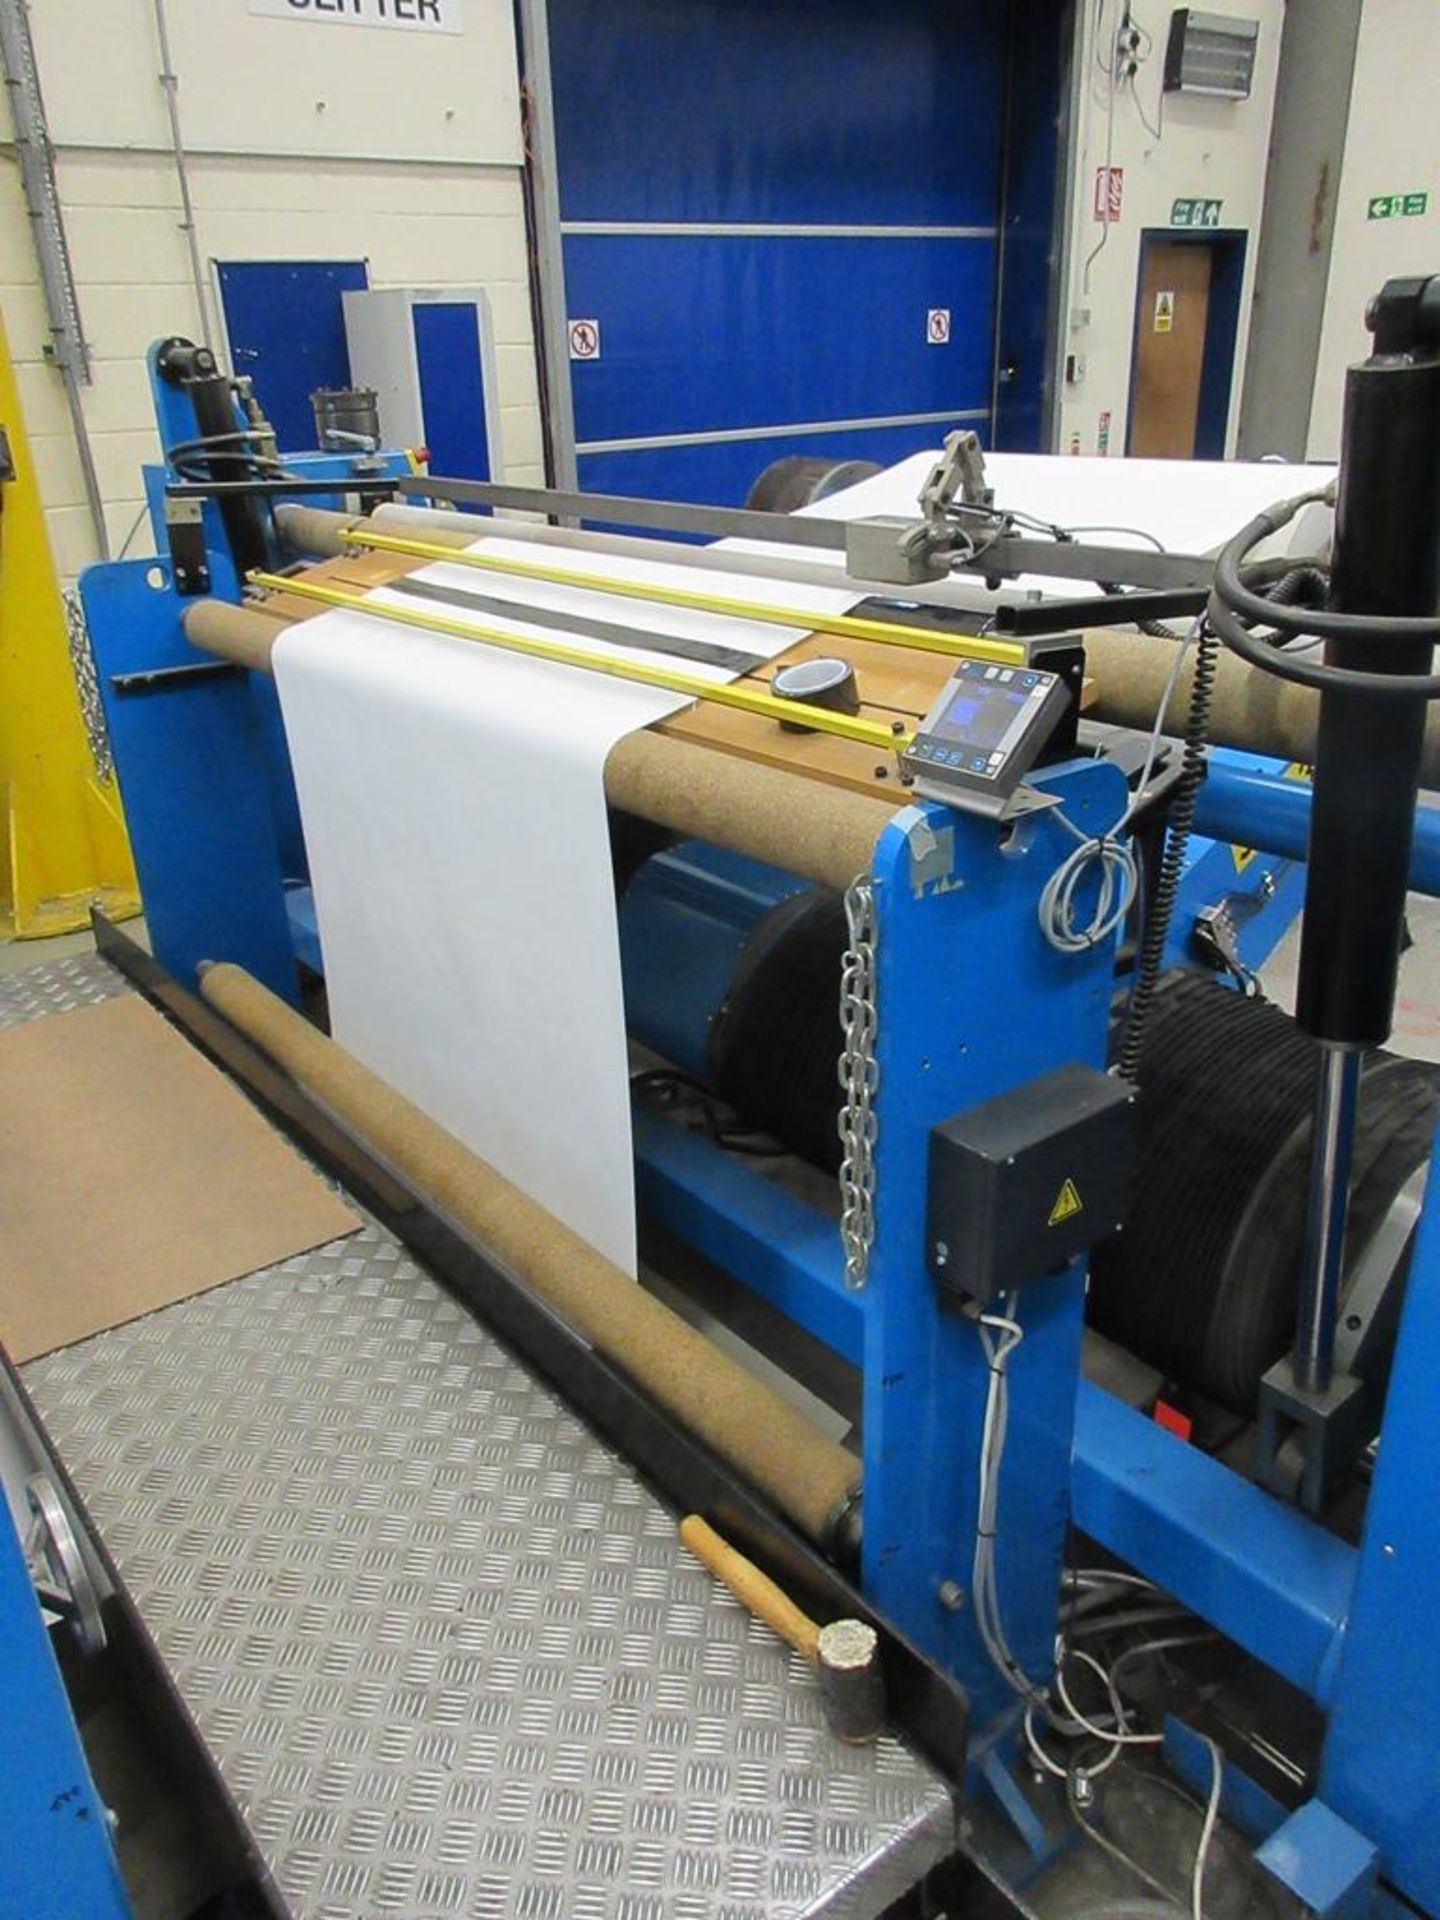 Elite Cameron CW600 automatic slitting machine, s/n: MO2030 (2001), capacity 3000kg with - - Image 12 of 16